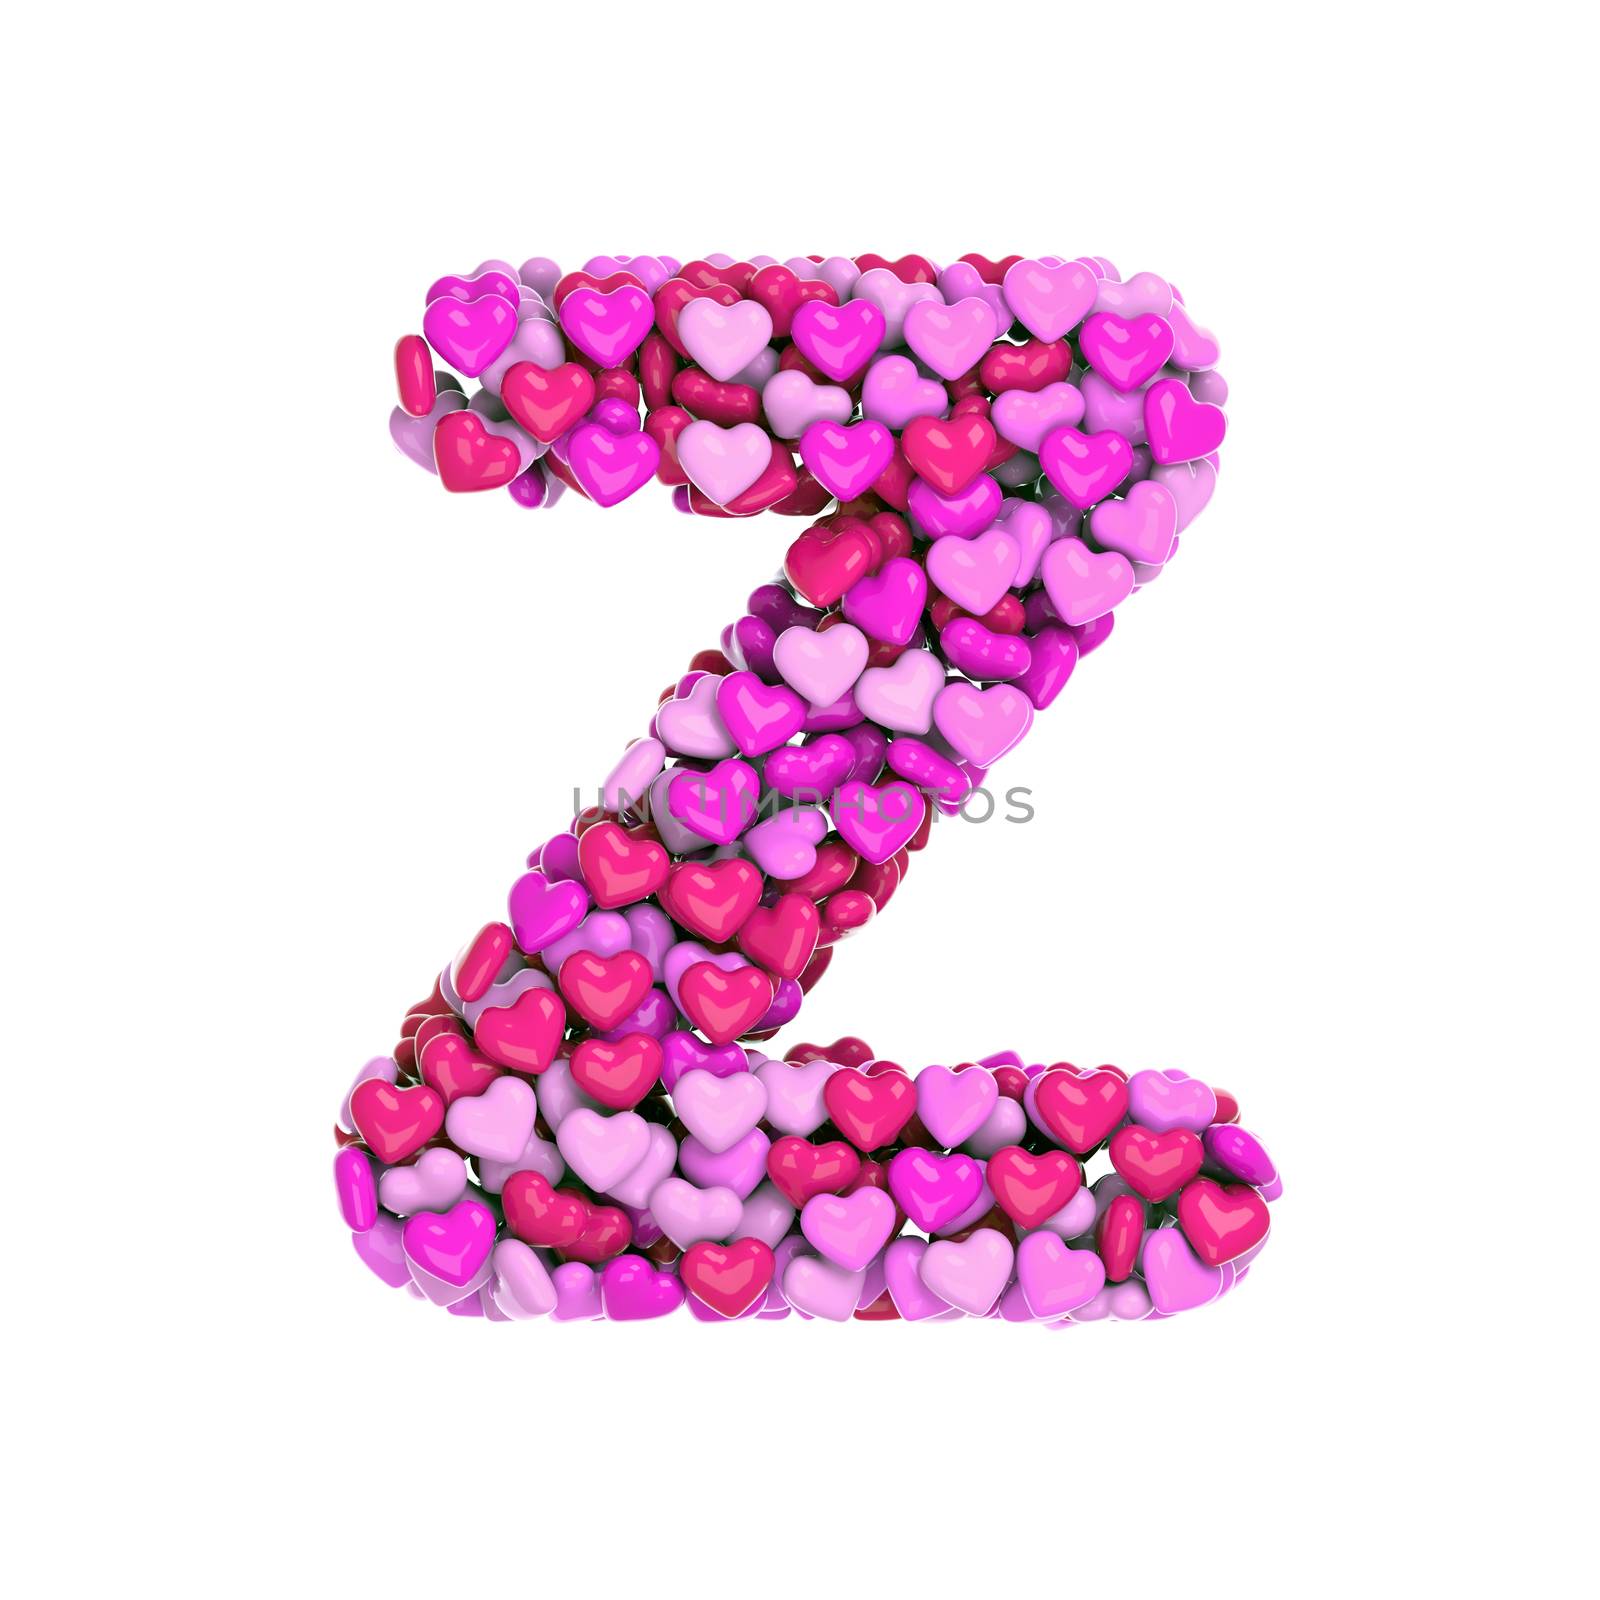 Valentine letter Z - Capital 3d pink hearts font isolated on white background. This alphabet is perfect for creative illustrations related but not limited to Love, passion, wedding...